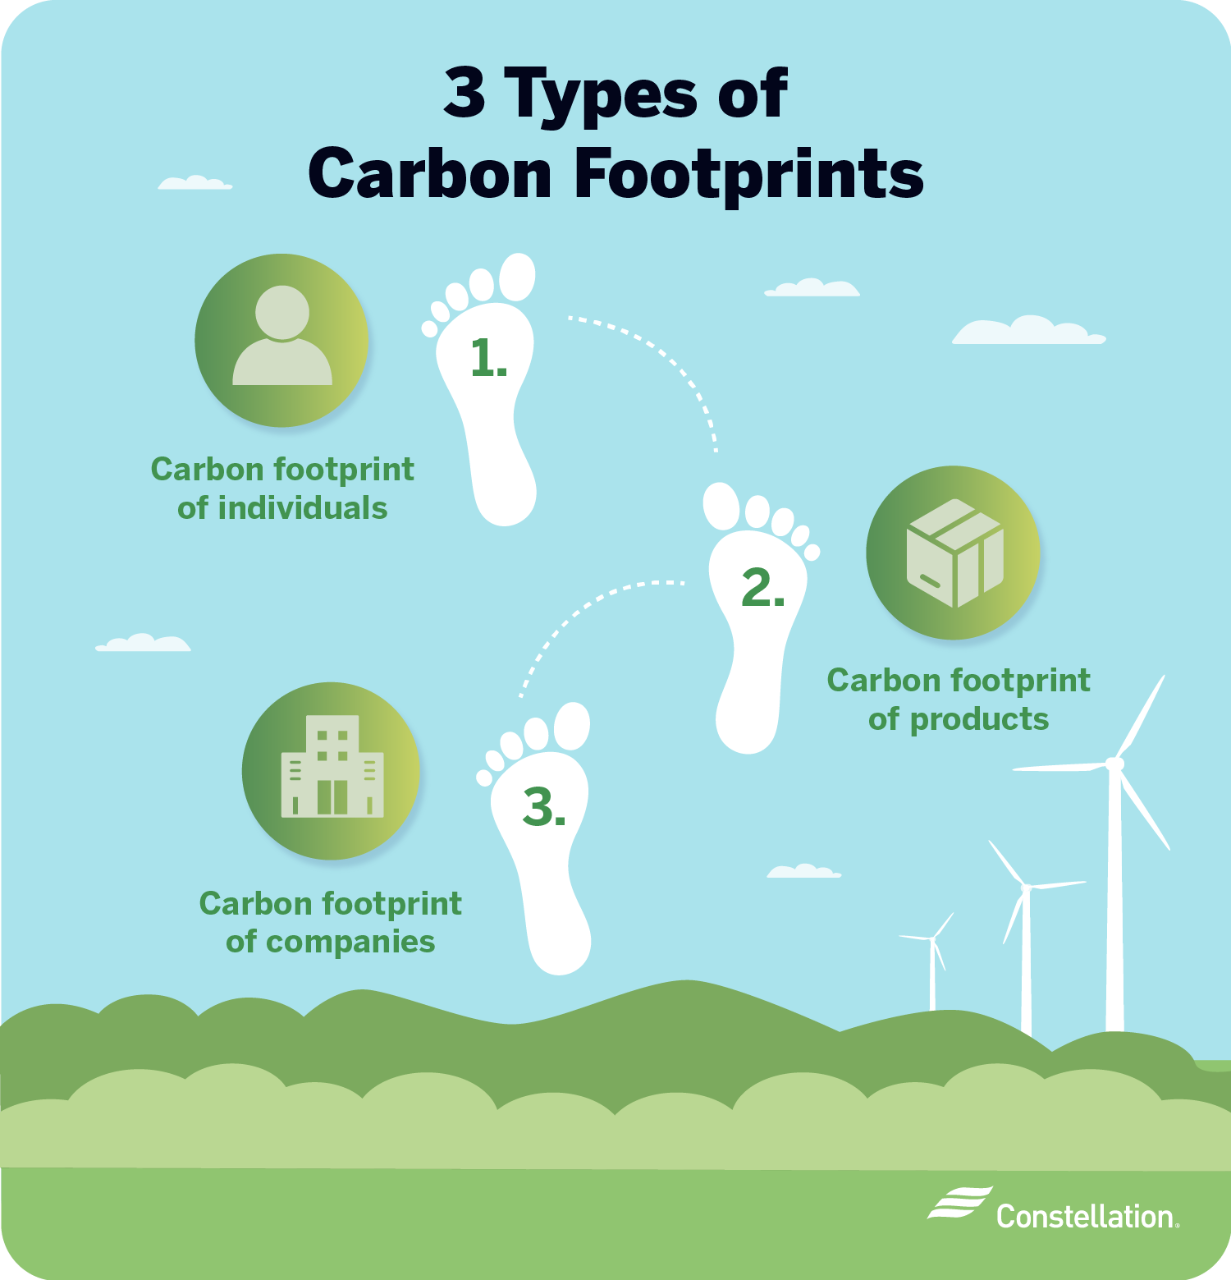 3 Types of Carbon Footprints